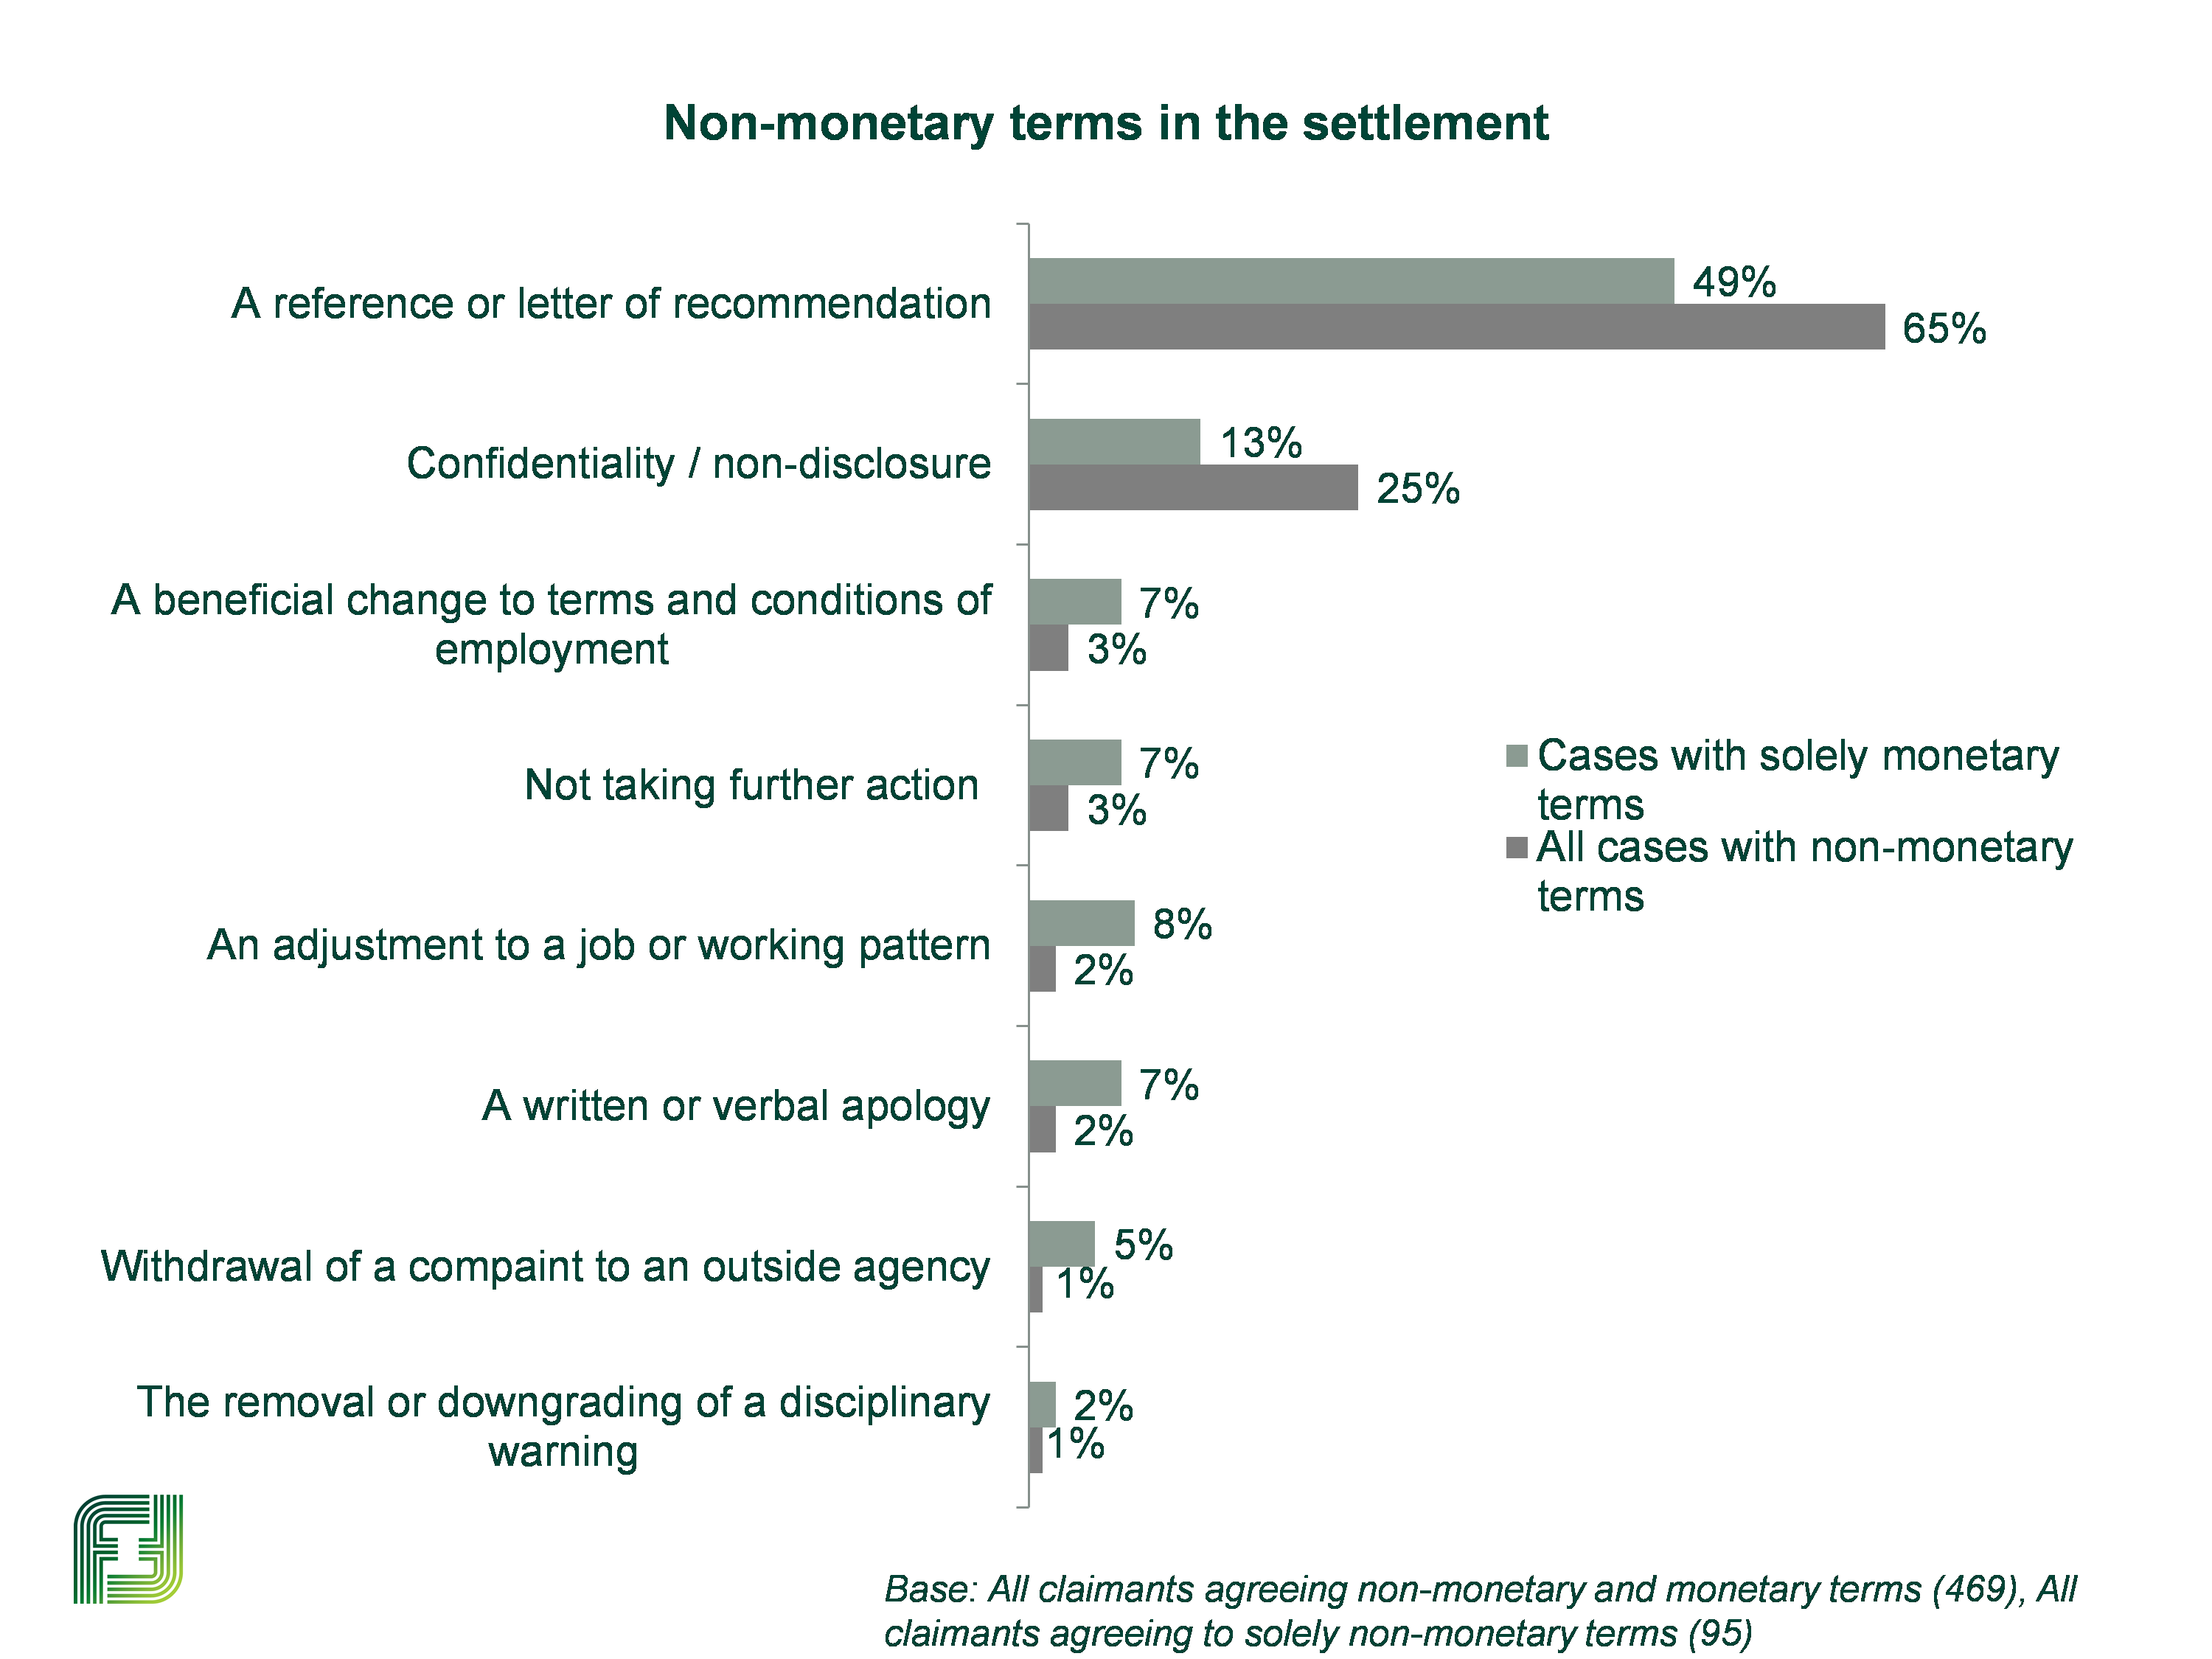 Bar chart showing that the most common non-monetary term in settlements was a reference or letter of recommendation. More details are in the previous text.